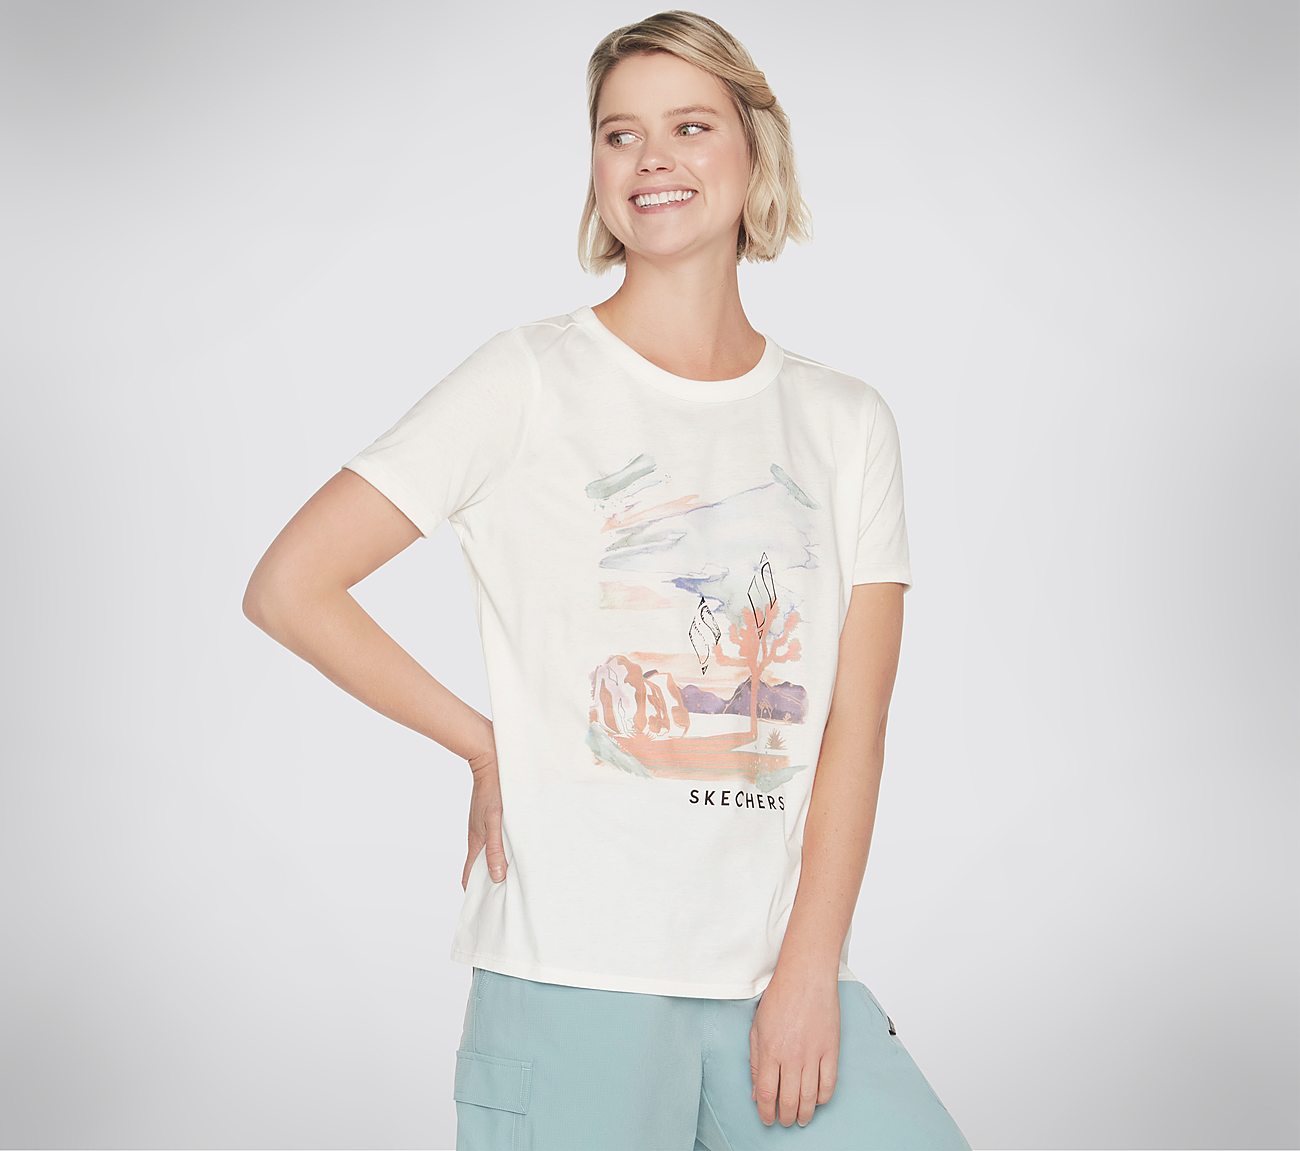 SKECHERS AIRBRUSH TEE, WHITE/SILVER Apparels Lateral View